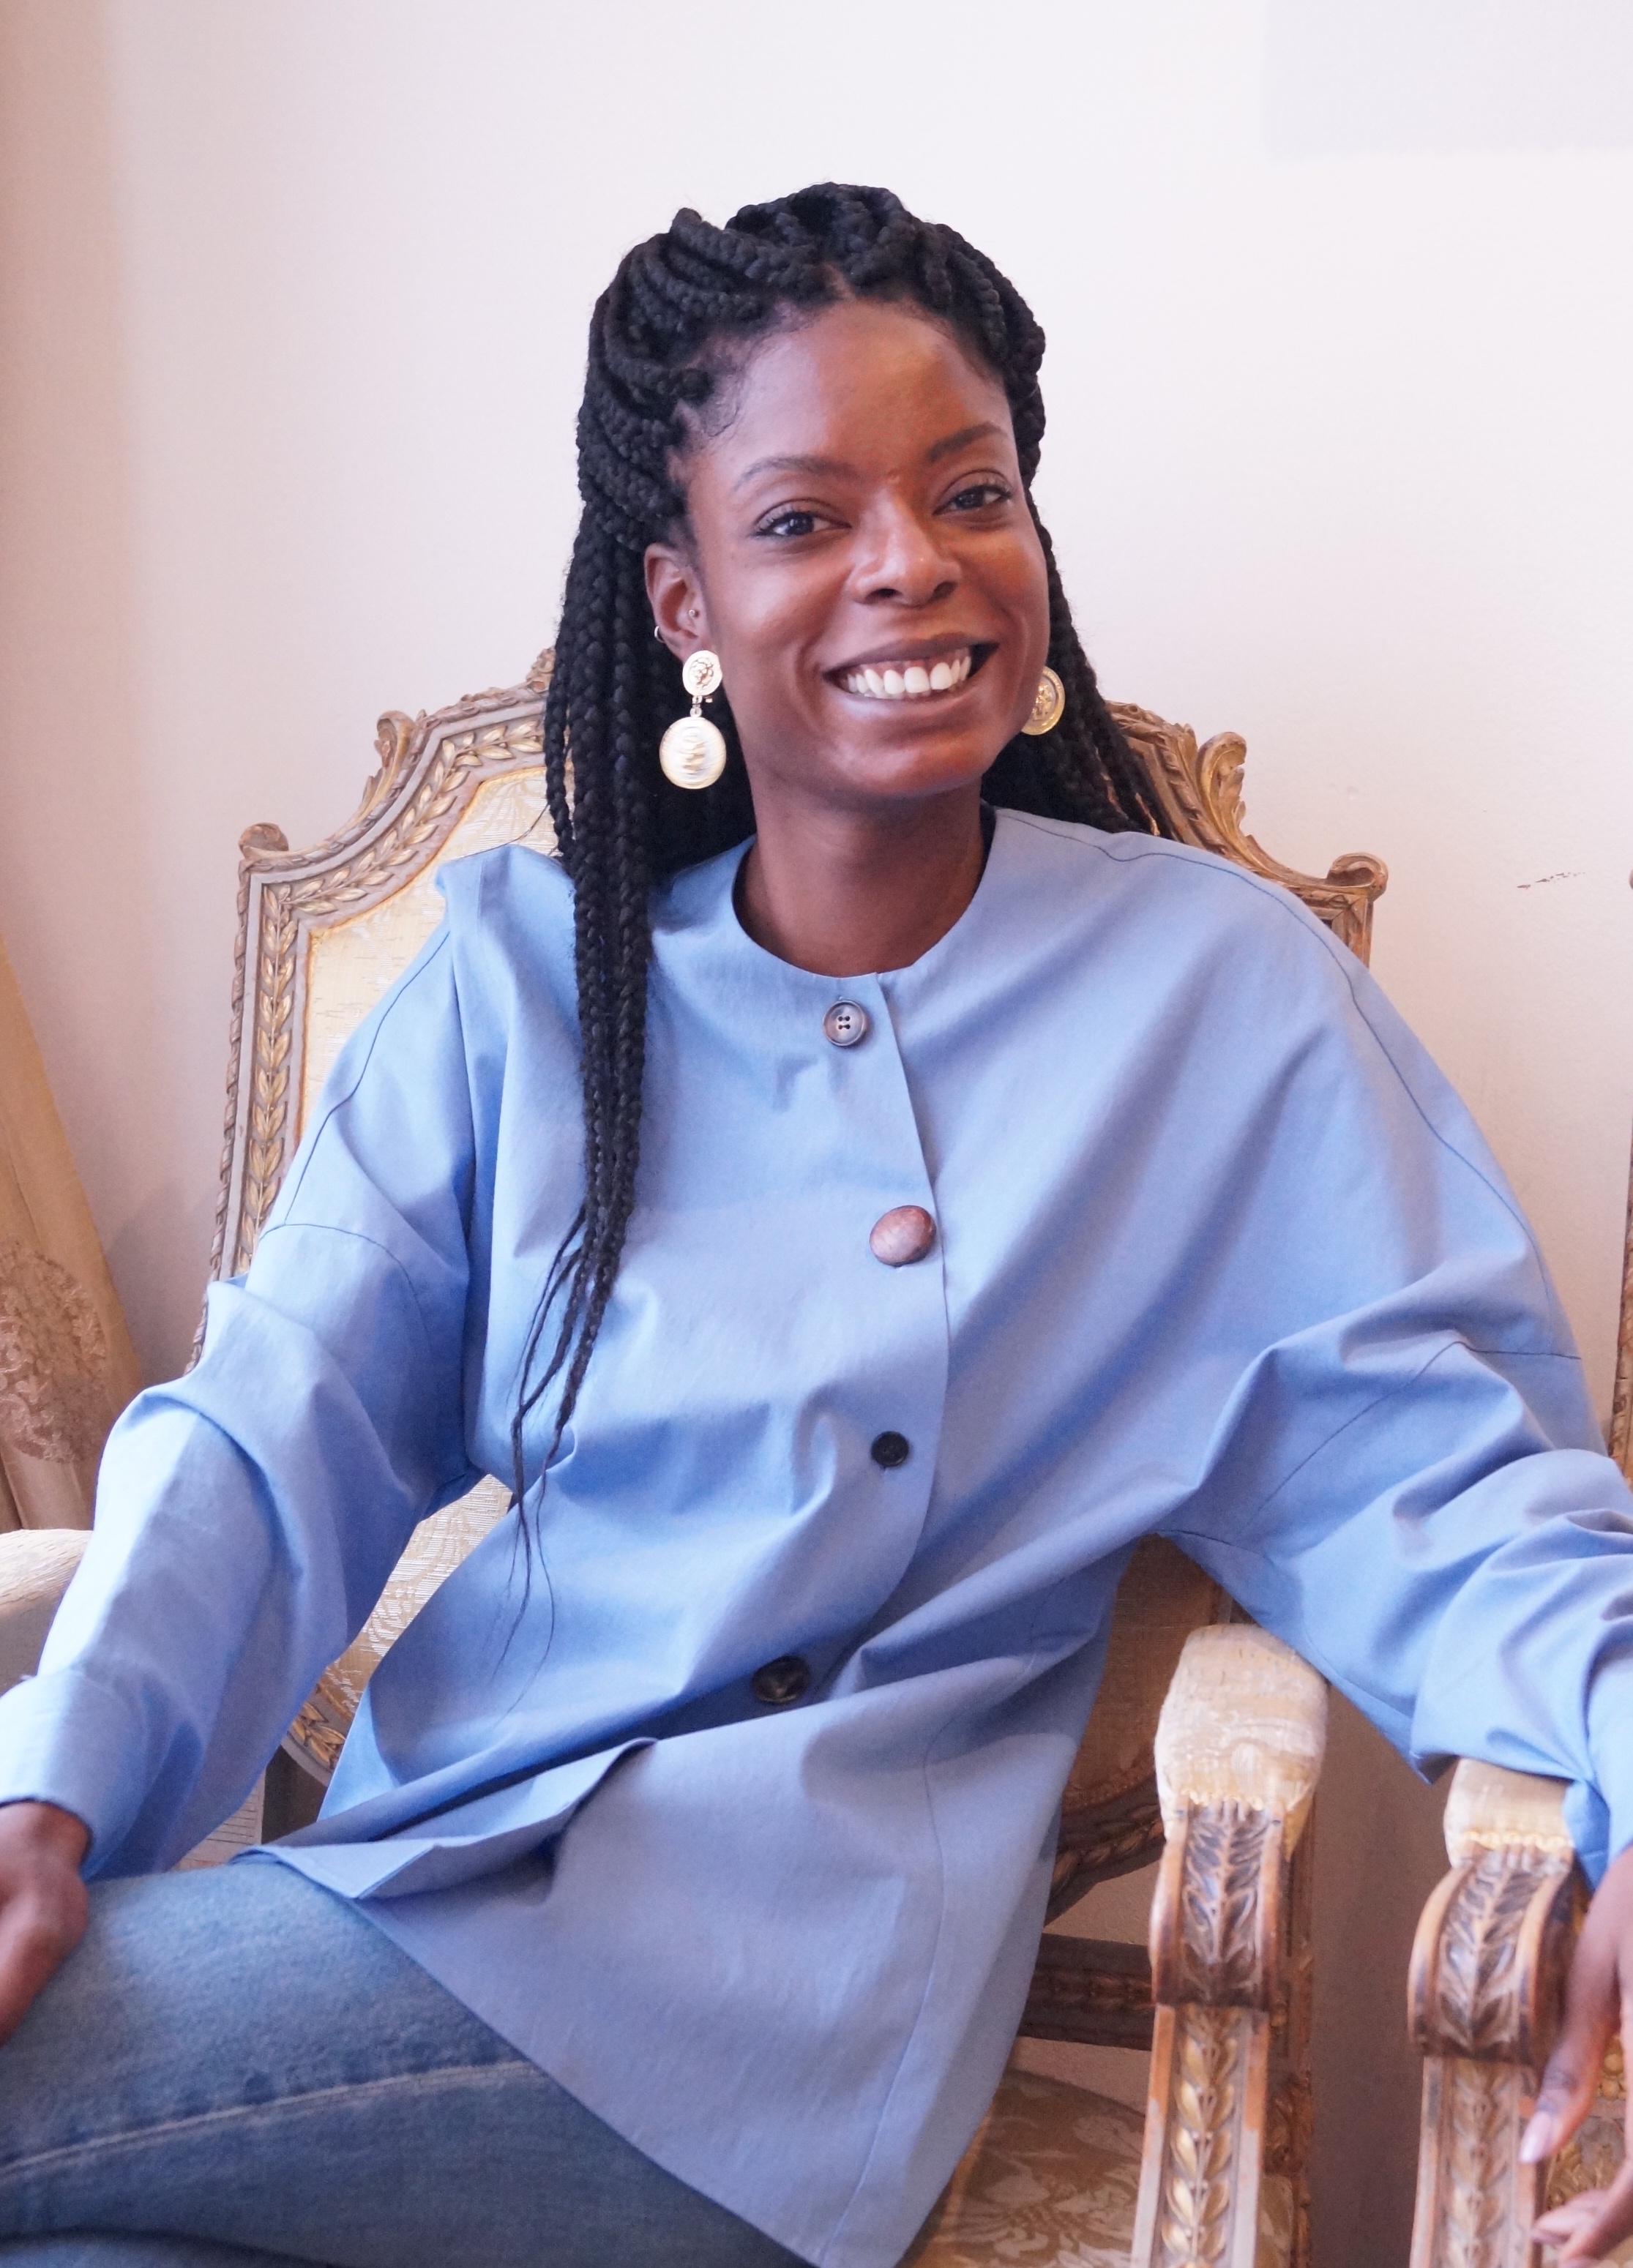 Interview with the founder of Women Who and author of The Sunday Times bestseller Little Black Book - Otegha Uwagba.